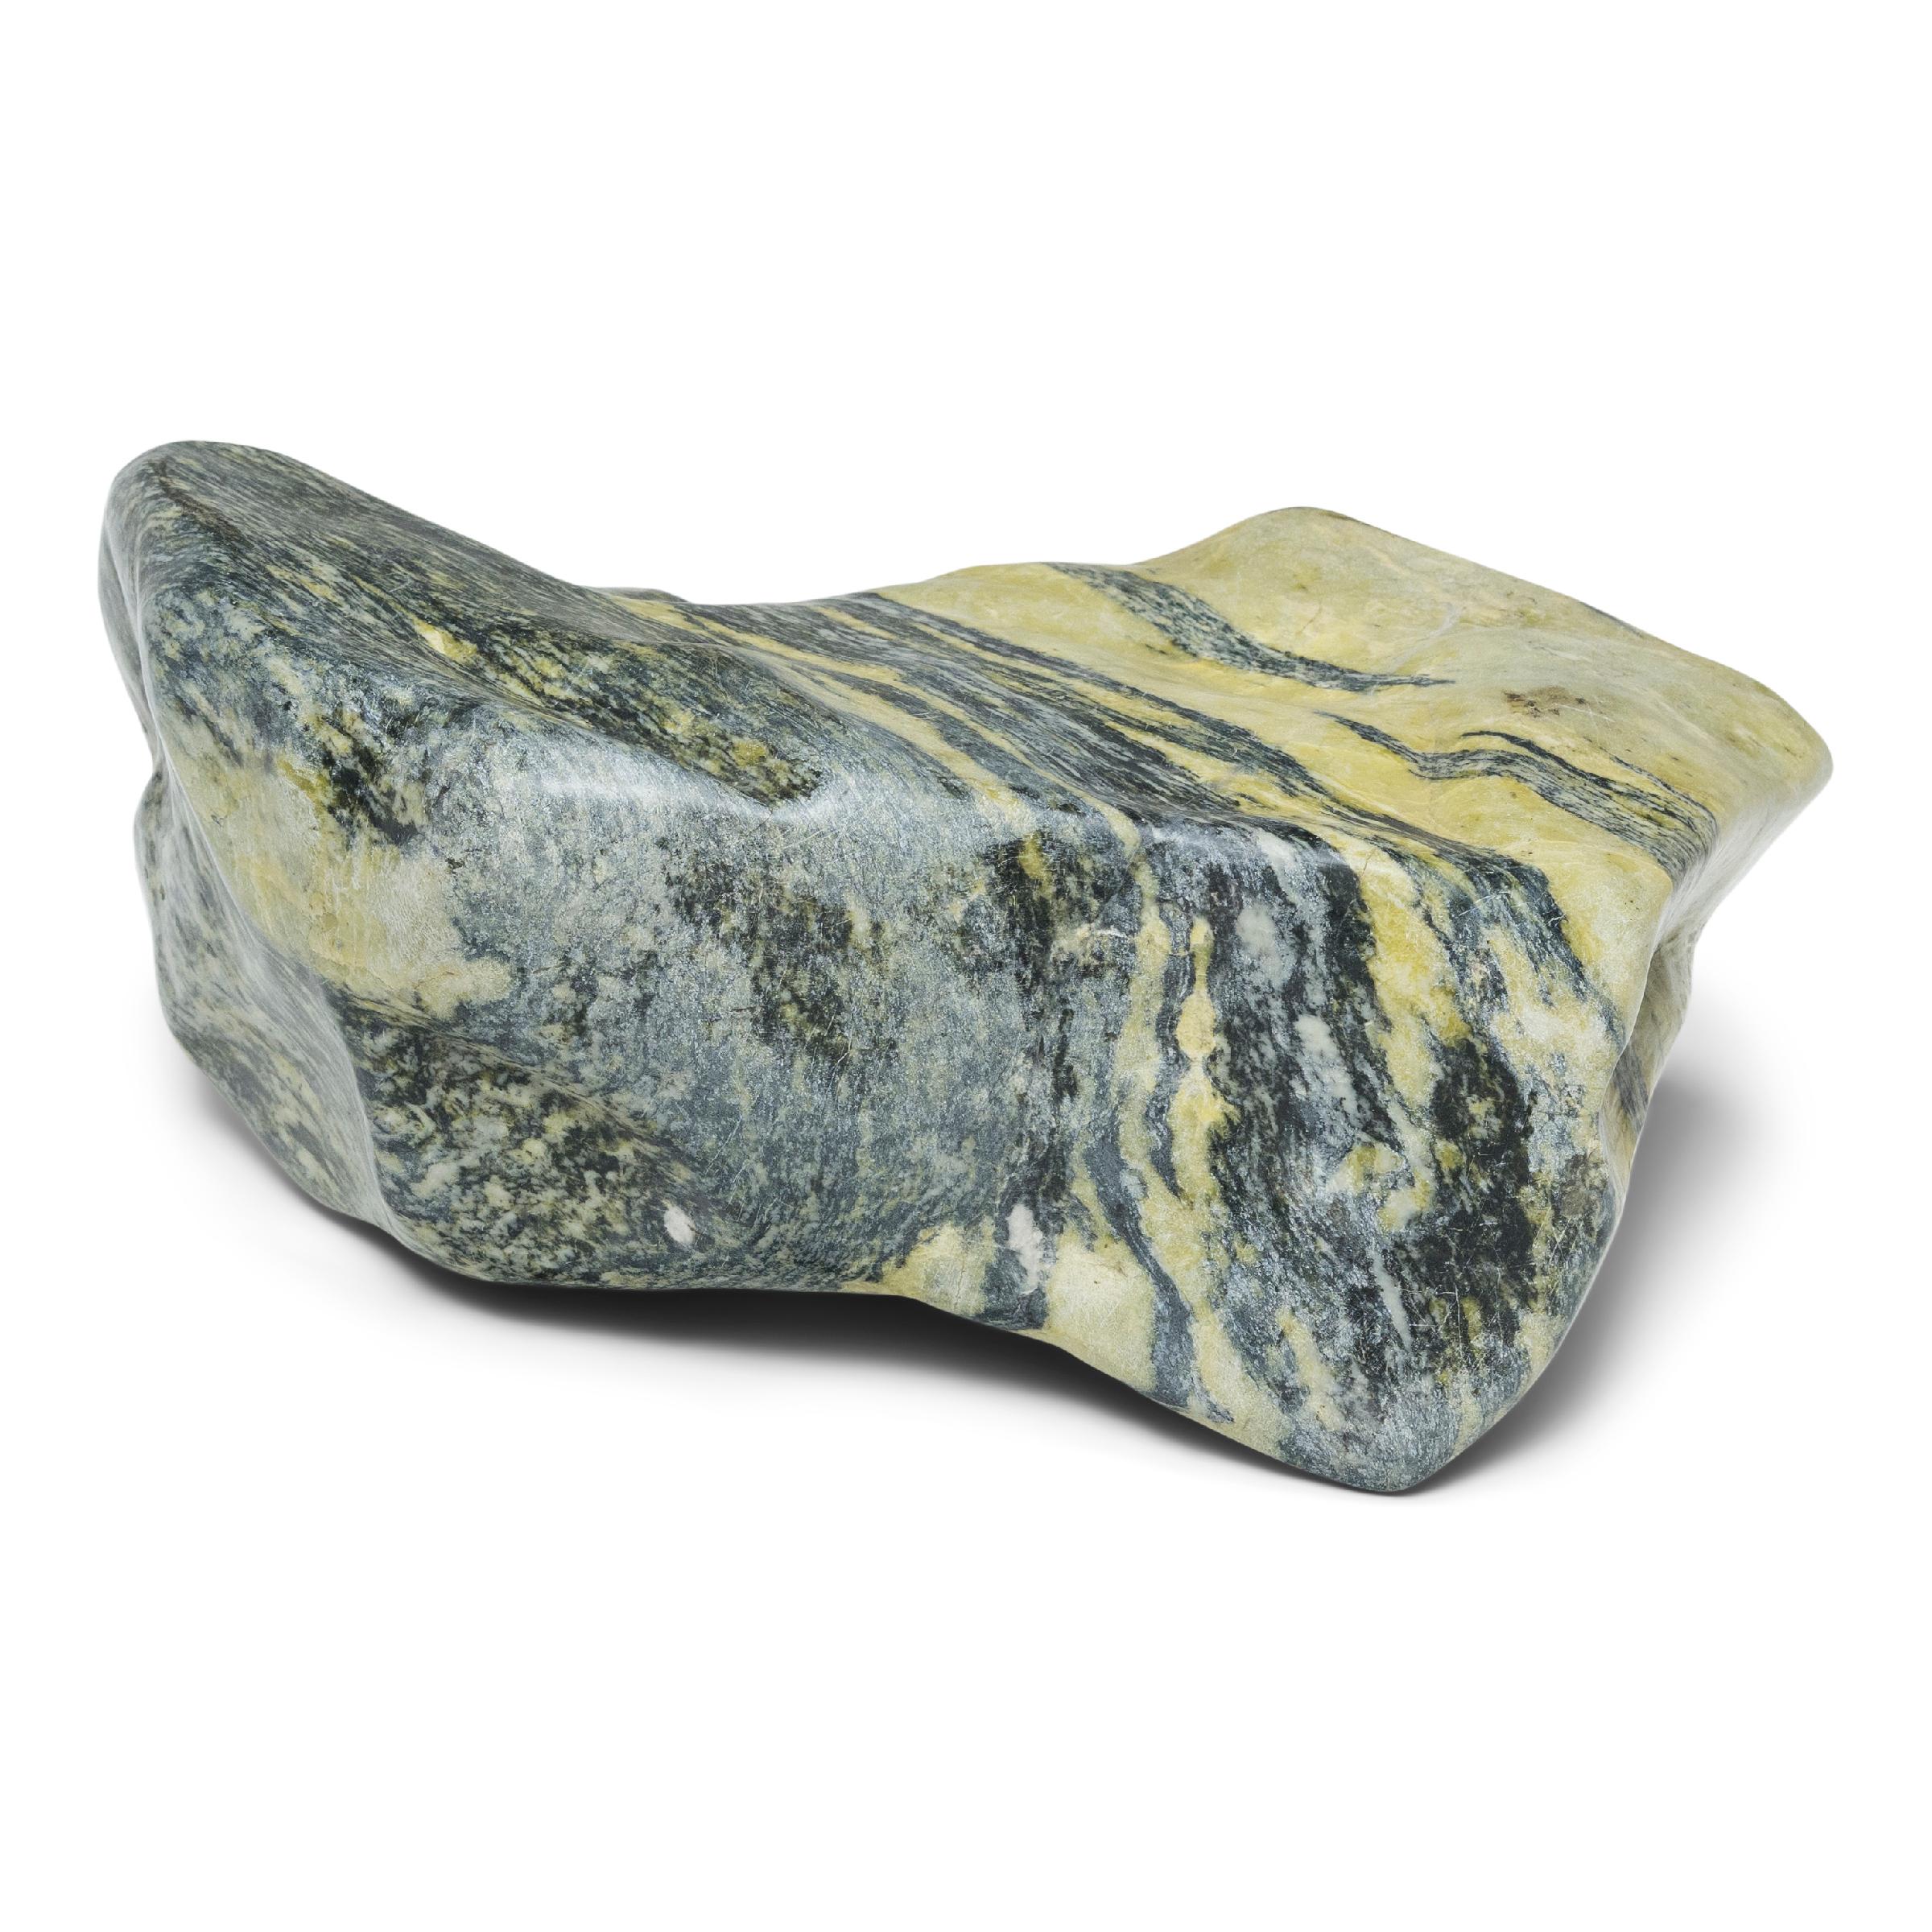 Following the sculpted form, marbled coloring, and natural veining of this one-of-a-kind stone can be deeply meditative. Viewed as a source of beauty and creativity, Chinese scholar-artists would decorate their studios and gardens with similar